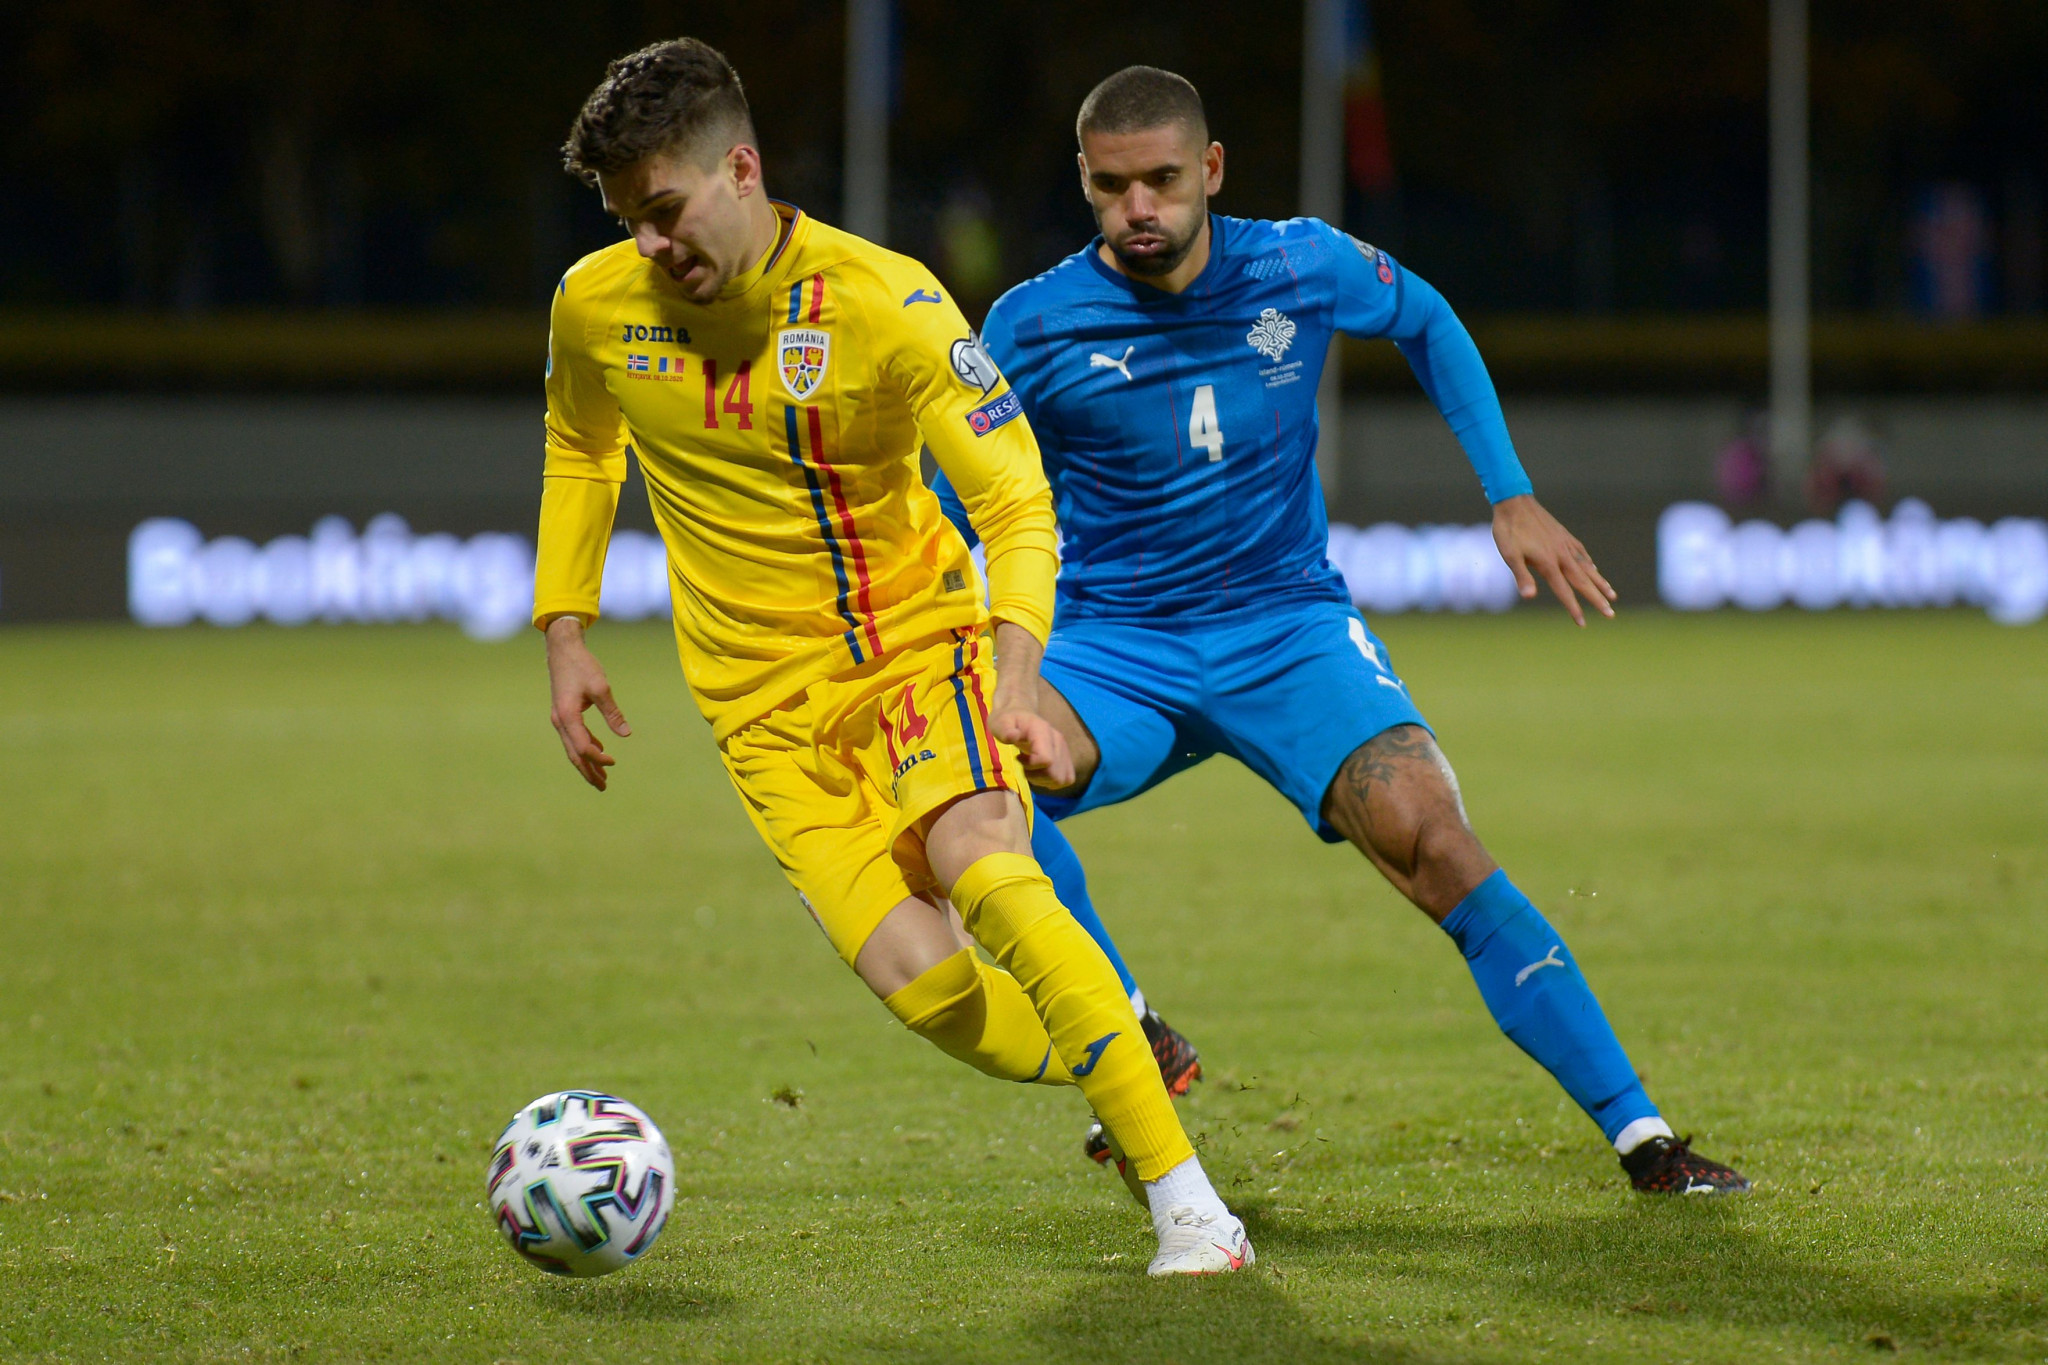 Romania have qualified for only one of the four international major competitions under Razven Burleanu's reign ©Getty Images